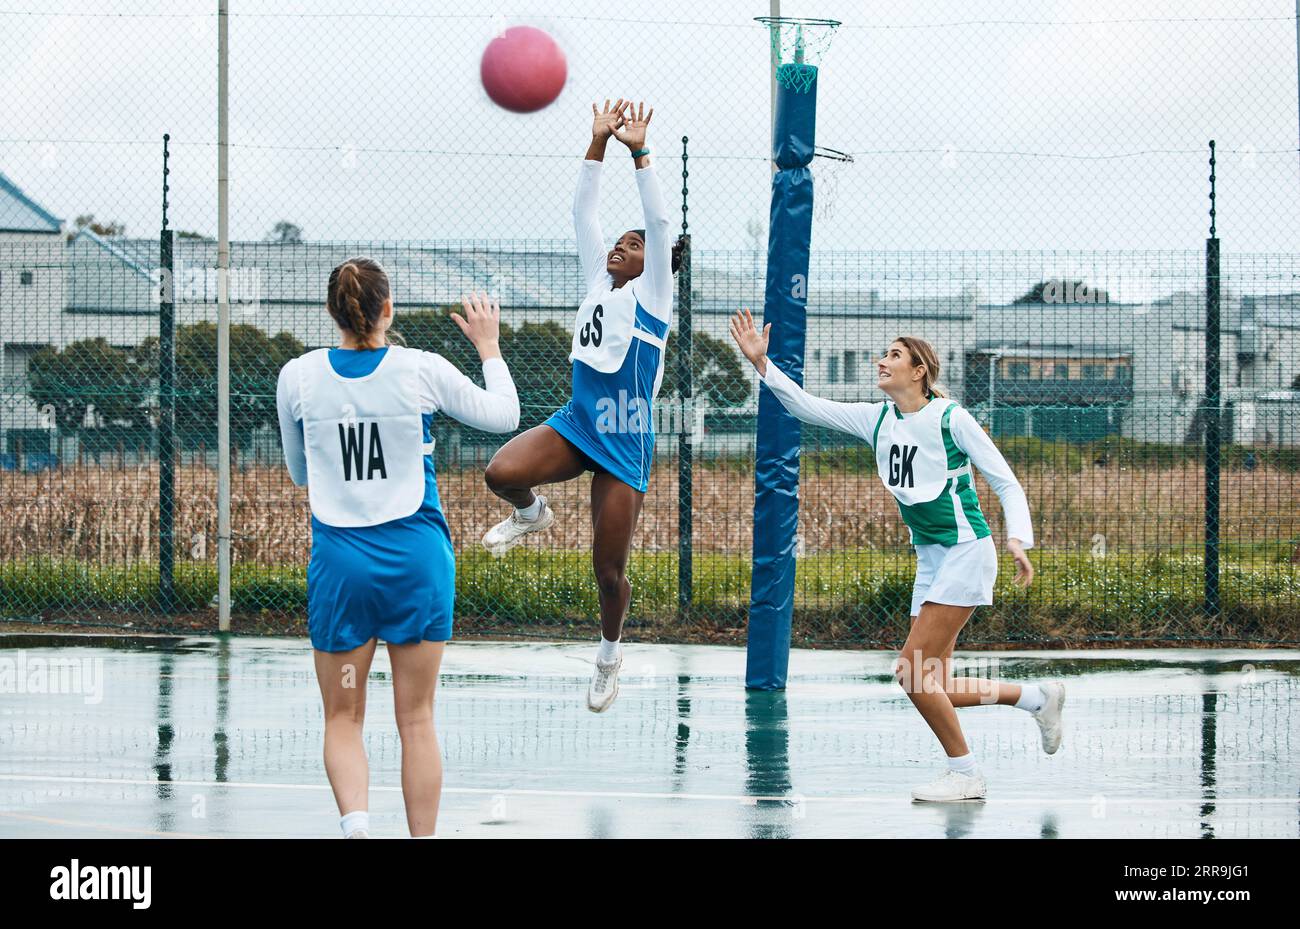 Netball, sports team and woman jump for ball, practice and playing game, court challenge or high school match. Fitness, teamwork and group workout Stock Photo